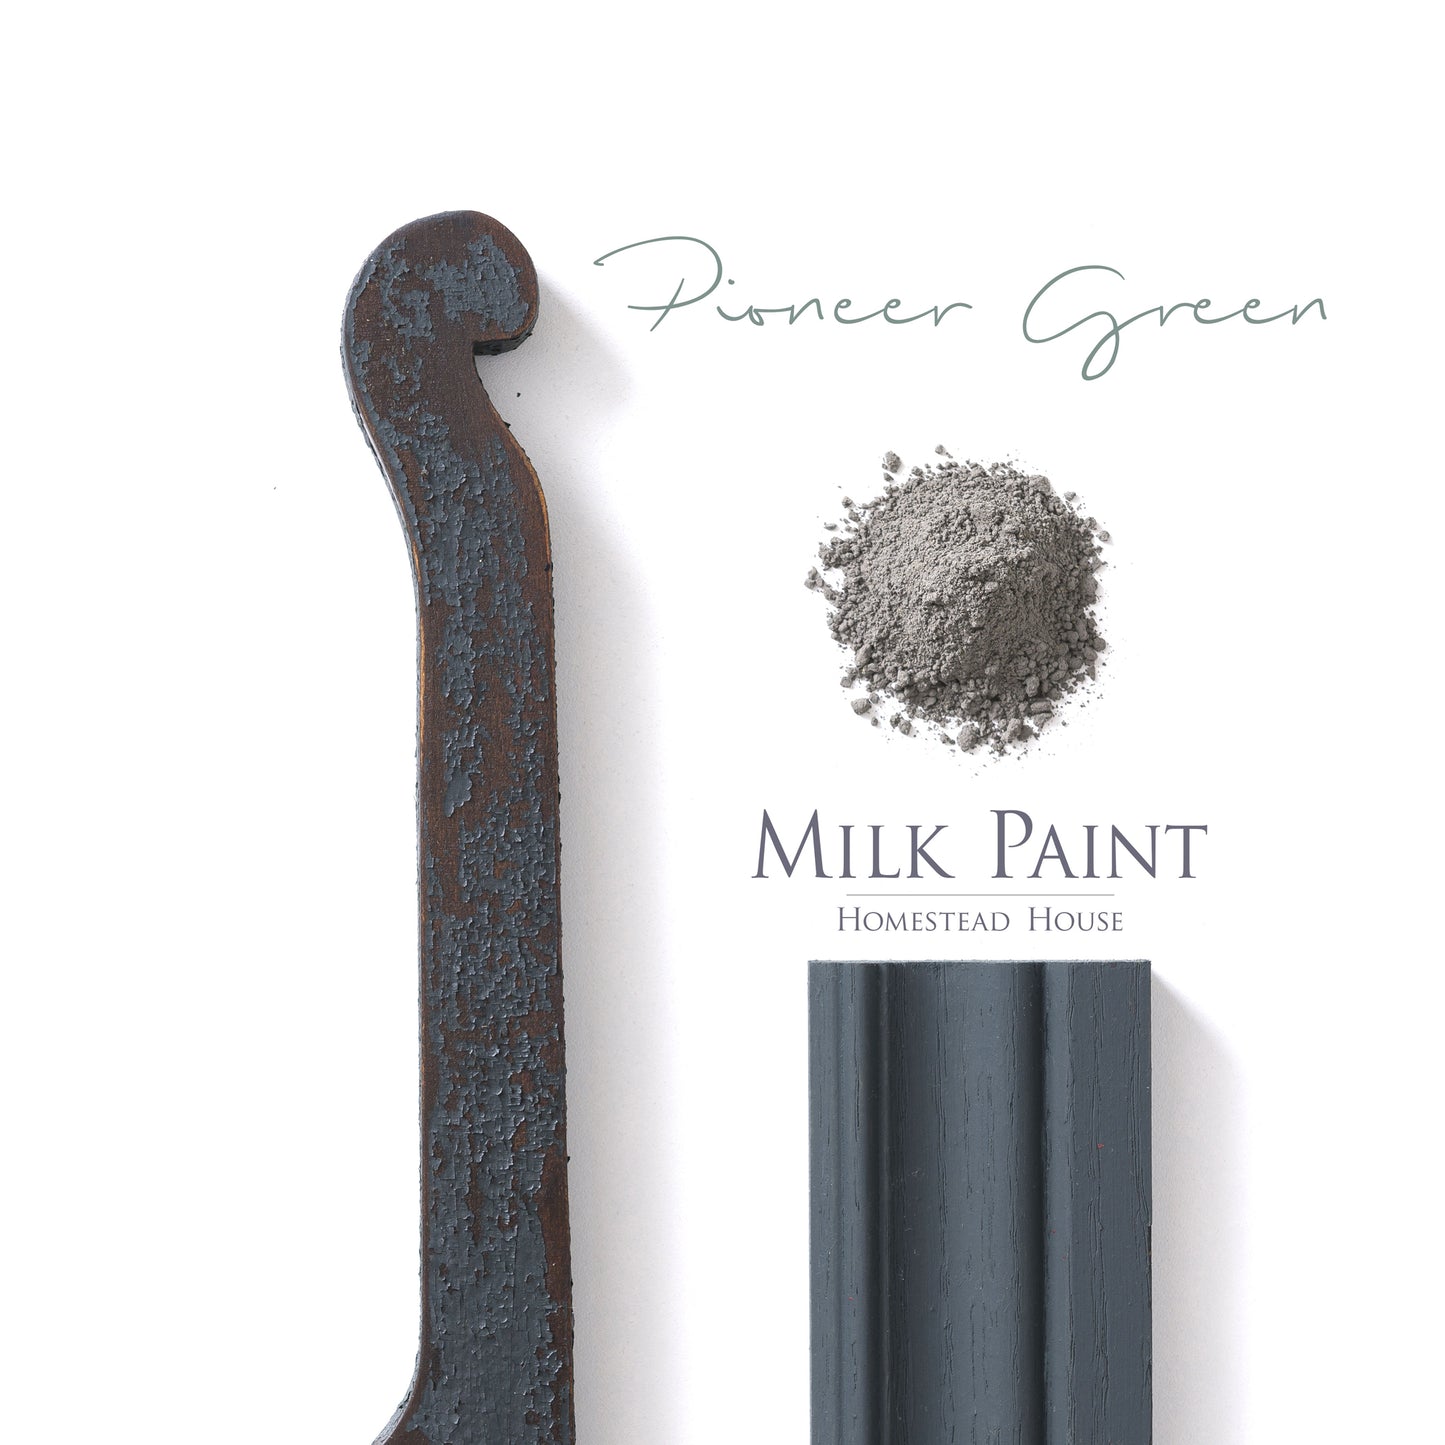 Milk Paint from Homestead House in Pioneer Green, our deepest darkest green which has a black hue.  |  homesteadhouse.ca